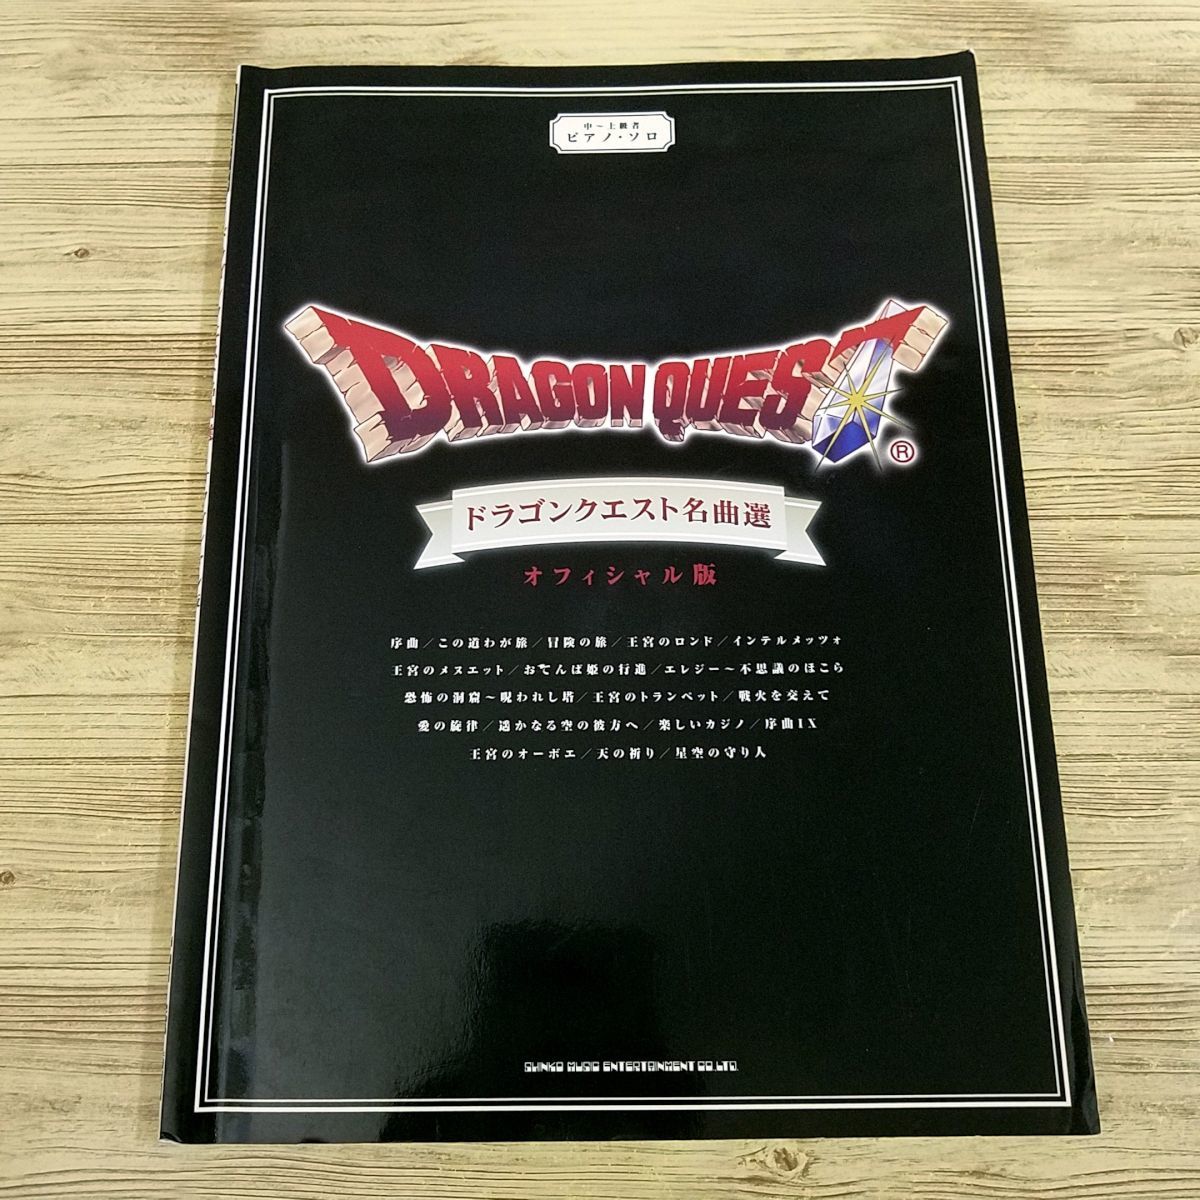  musical score [ middle - experienced person piano * Solo Dragon Quest masterpiece selection official version ] gong ke game musical score ..........